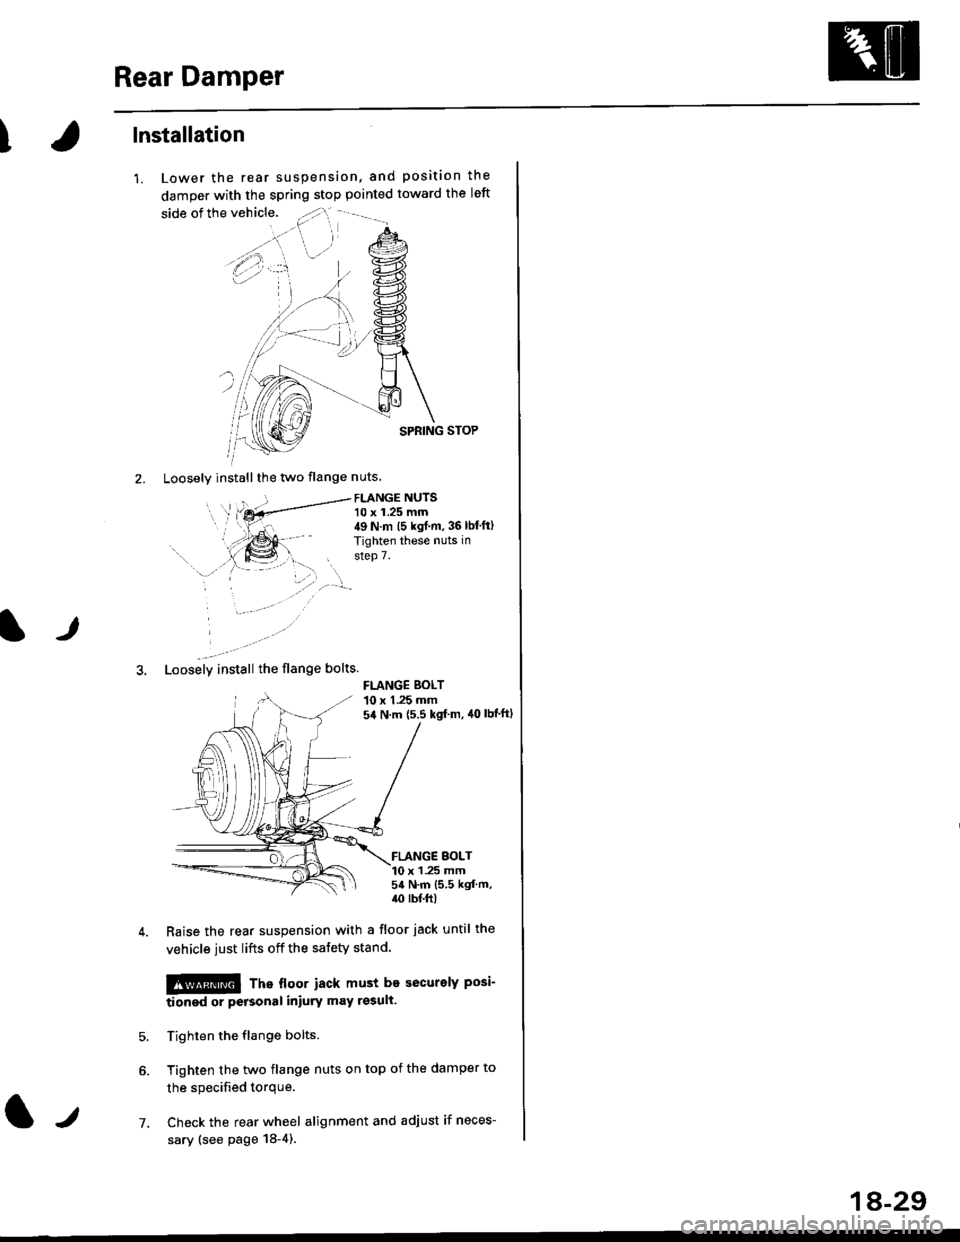 HONDA CIVIC 1996 6.G User Guide Rear Damper
Ilnstallation
1. Lower the rear suspension, and position the
damper with the spring stop pointed toward the left
SPRING STOP
2. Loosely installthe two flange nuts
FLANGE NUTS10 x 1.25 mm4